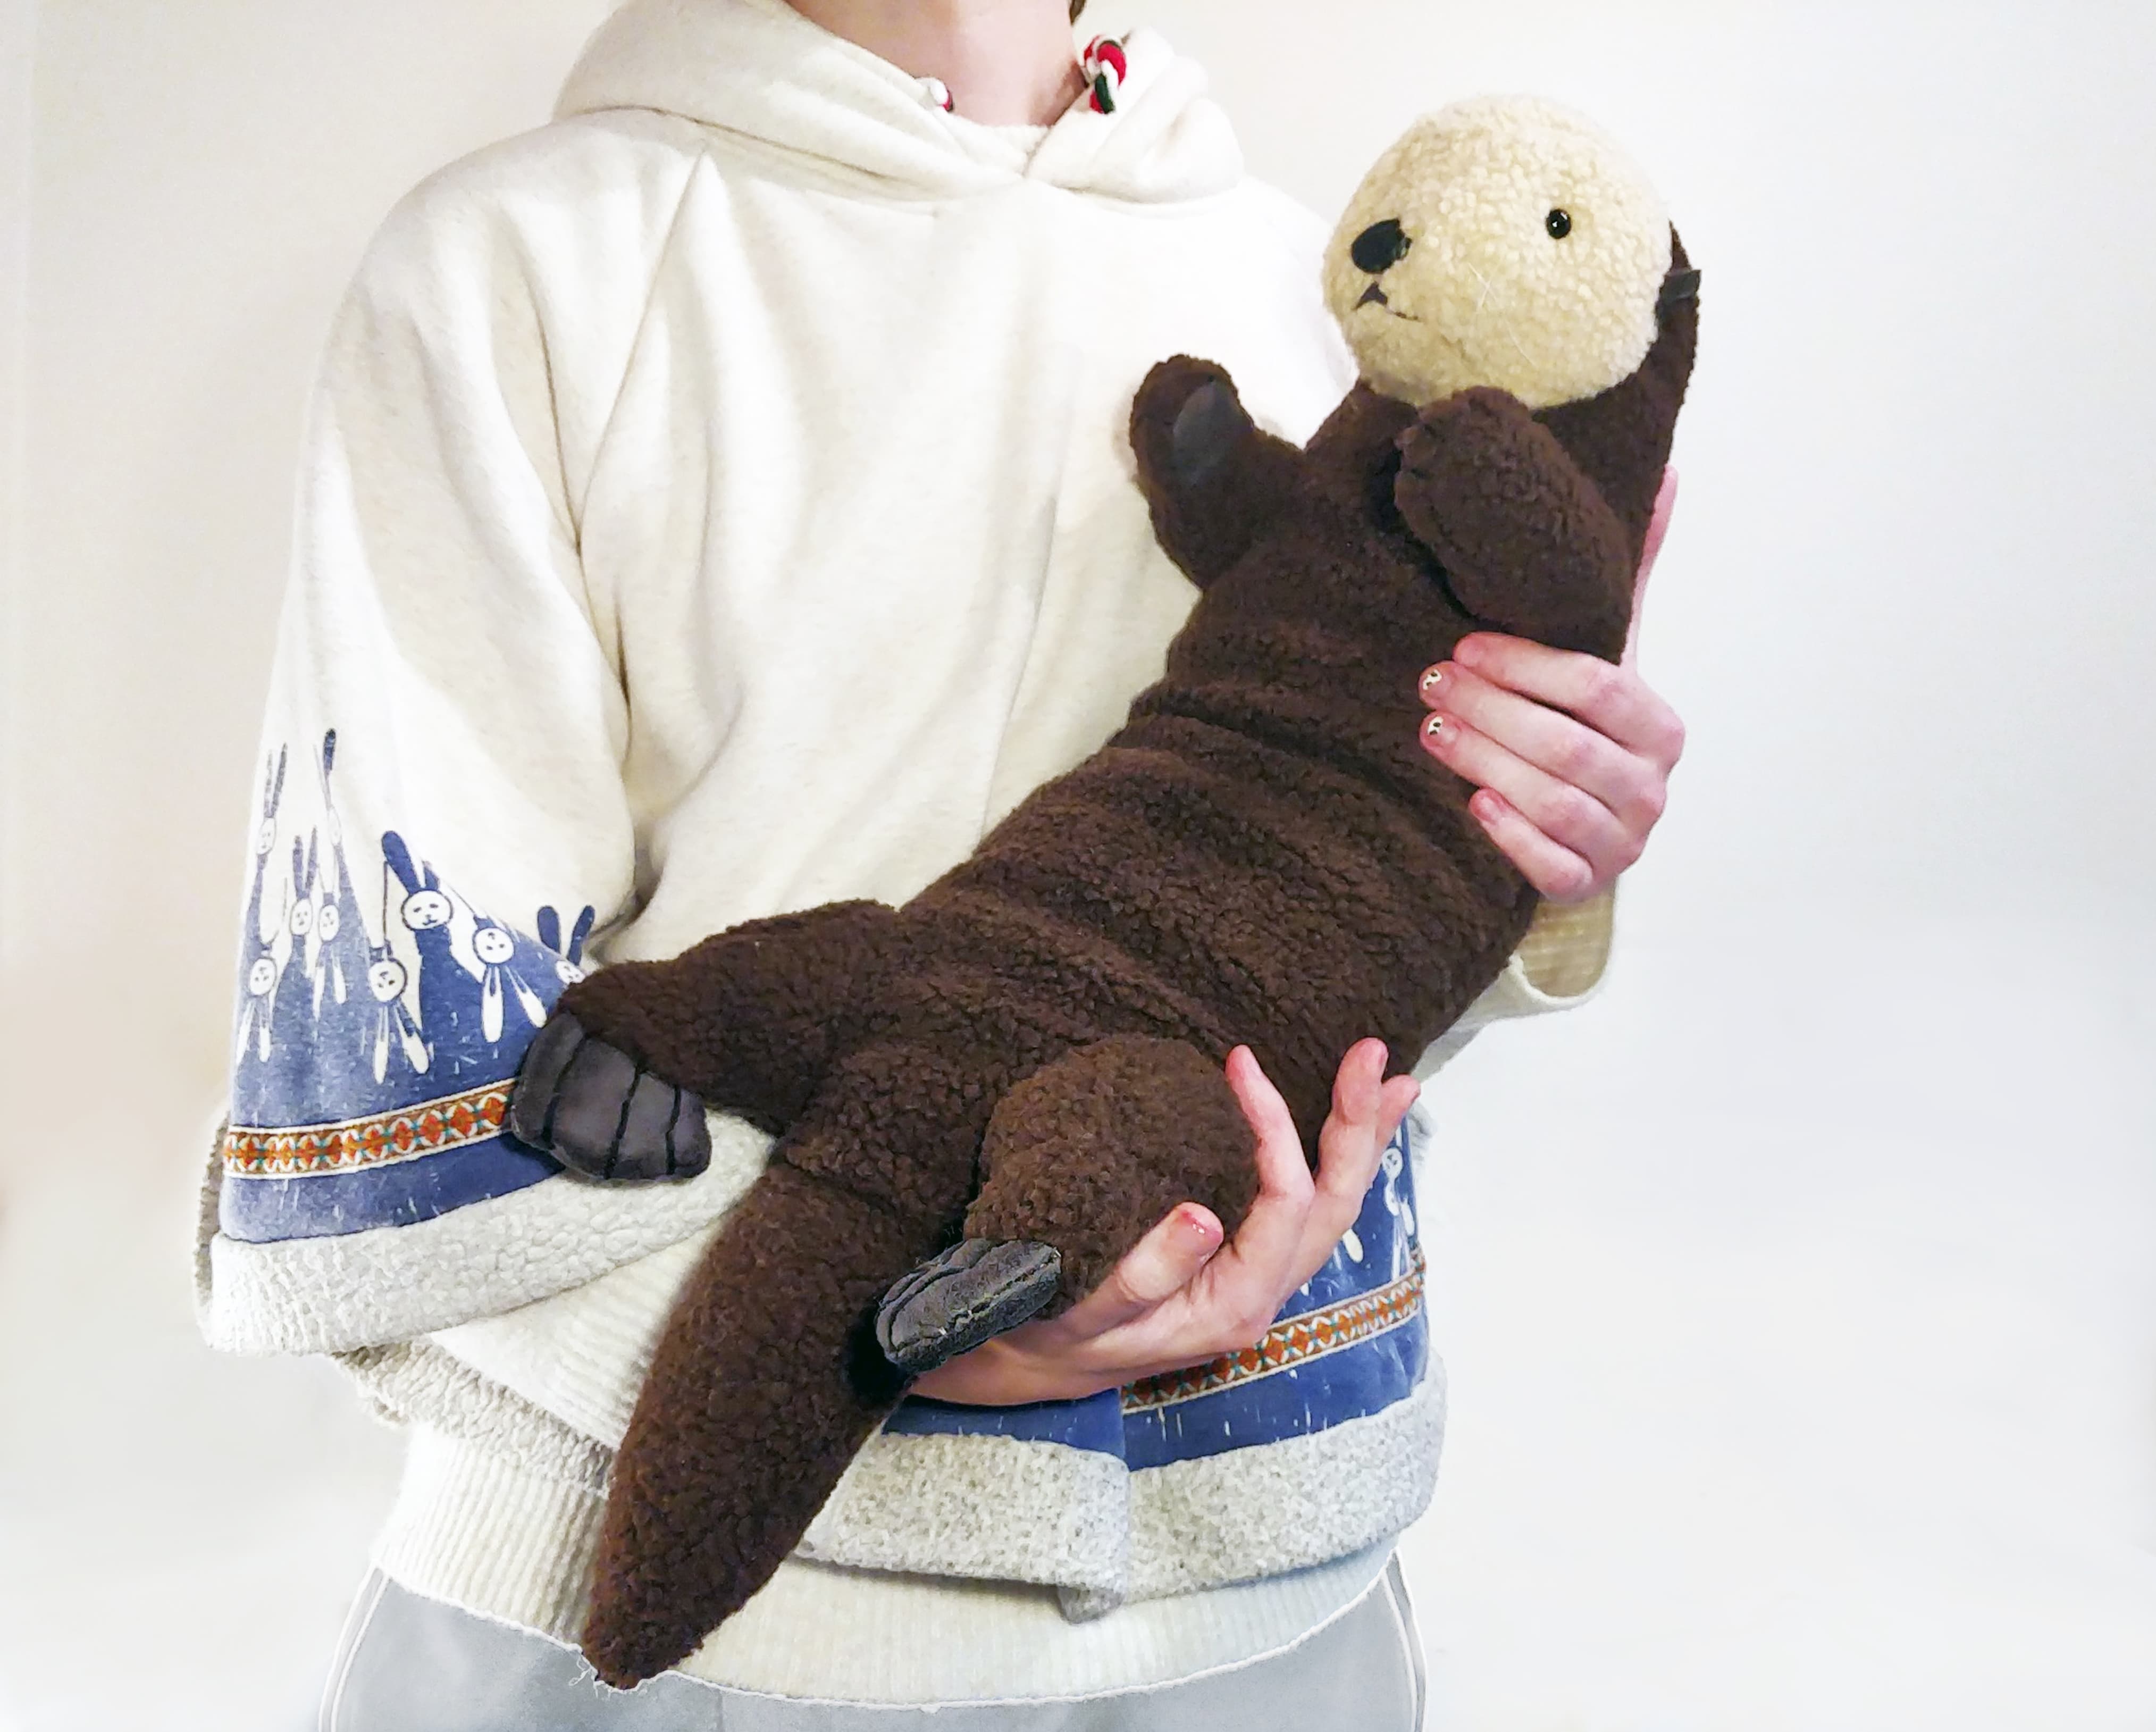 Thumbnail image: A figure holding a stuffed toy otter